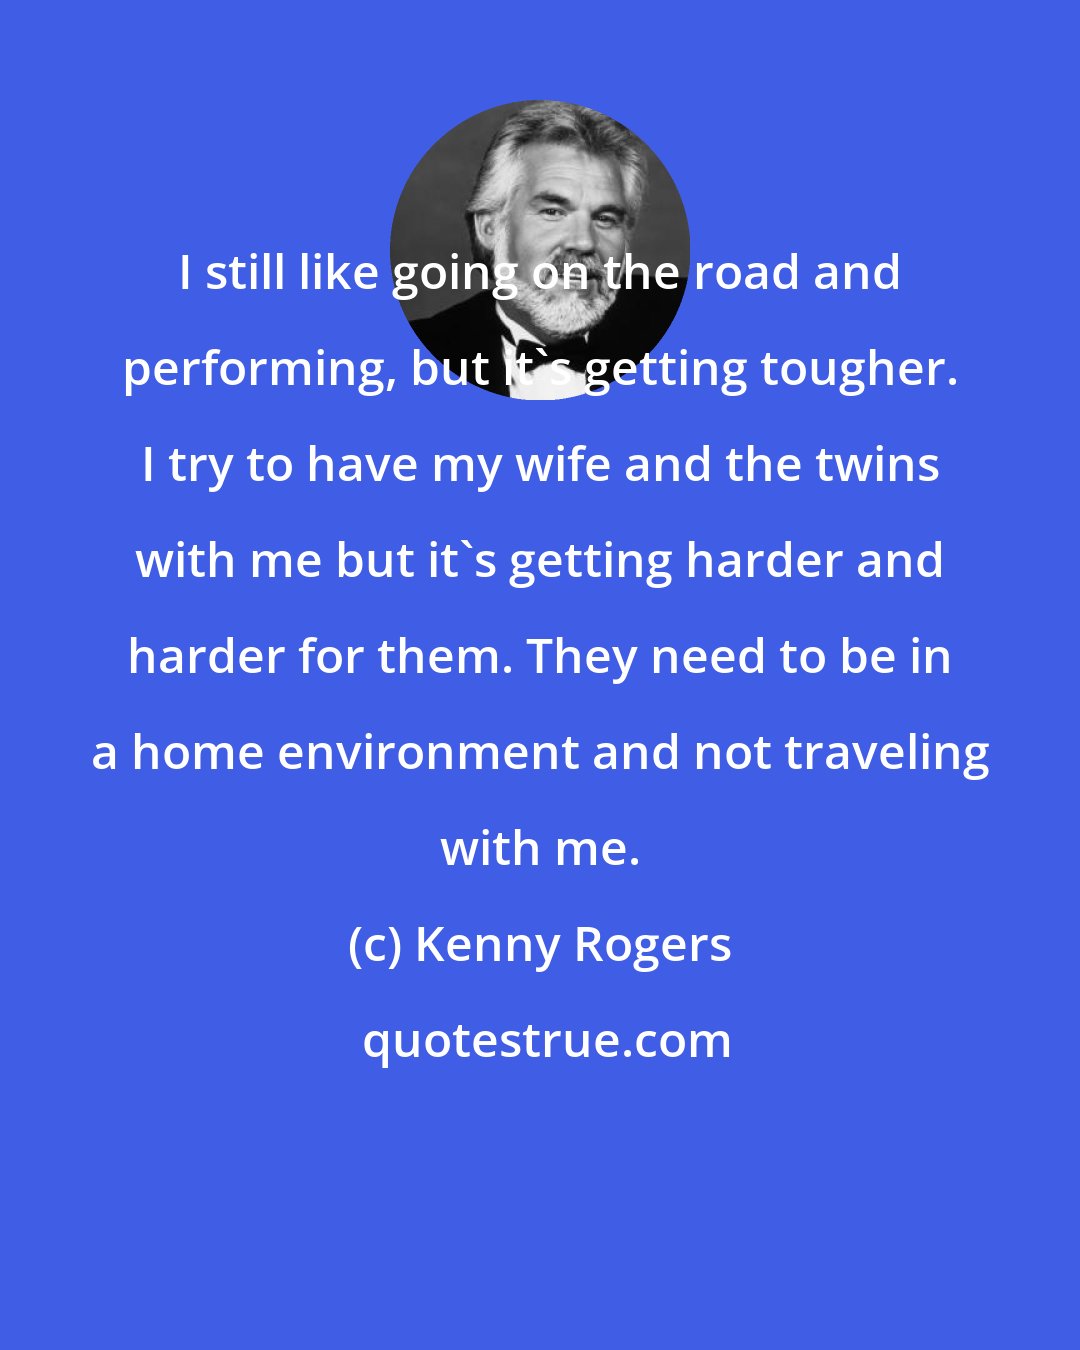 Kenny Rogers: I still like going on the road and performing, but it's getting tougher. I try to have my wife and the twins with me but it's getting harder and harder for them. They need to be in a home environment and not traveling with me.